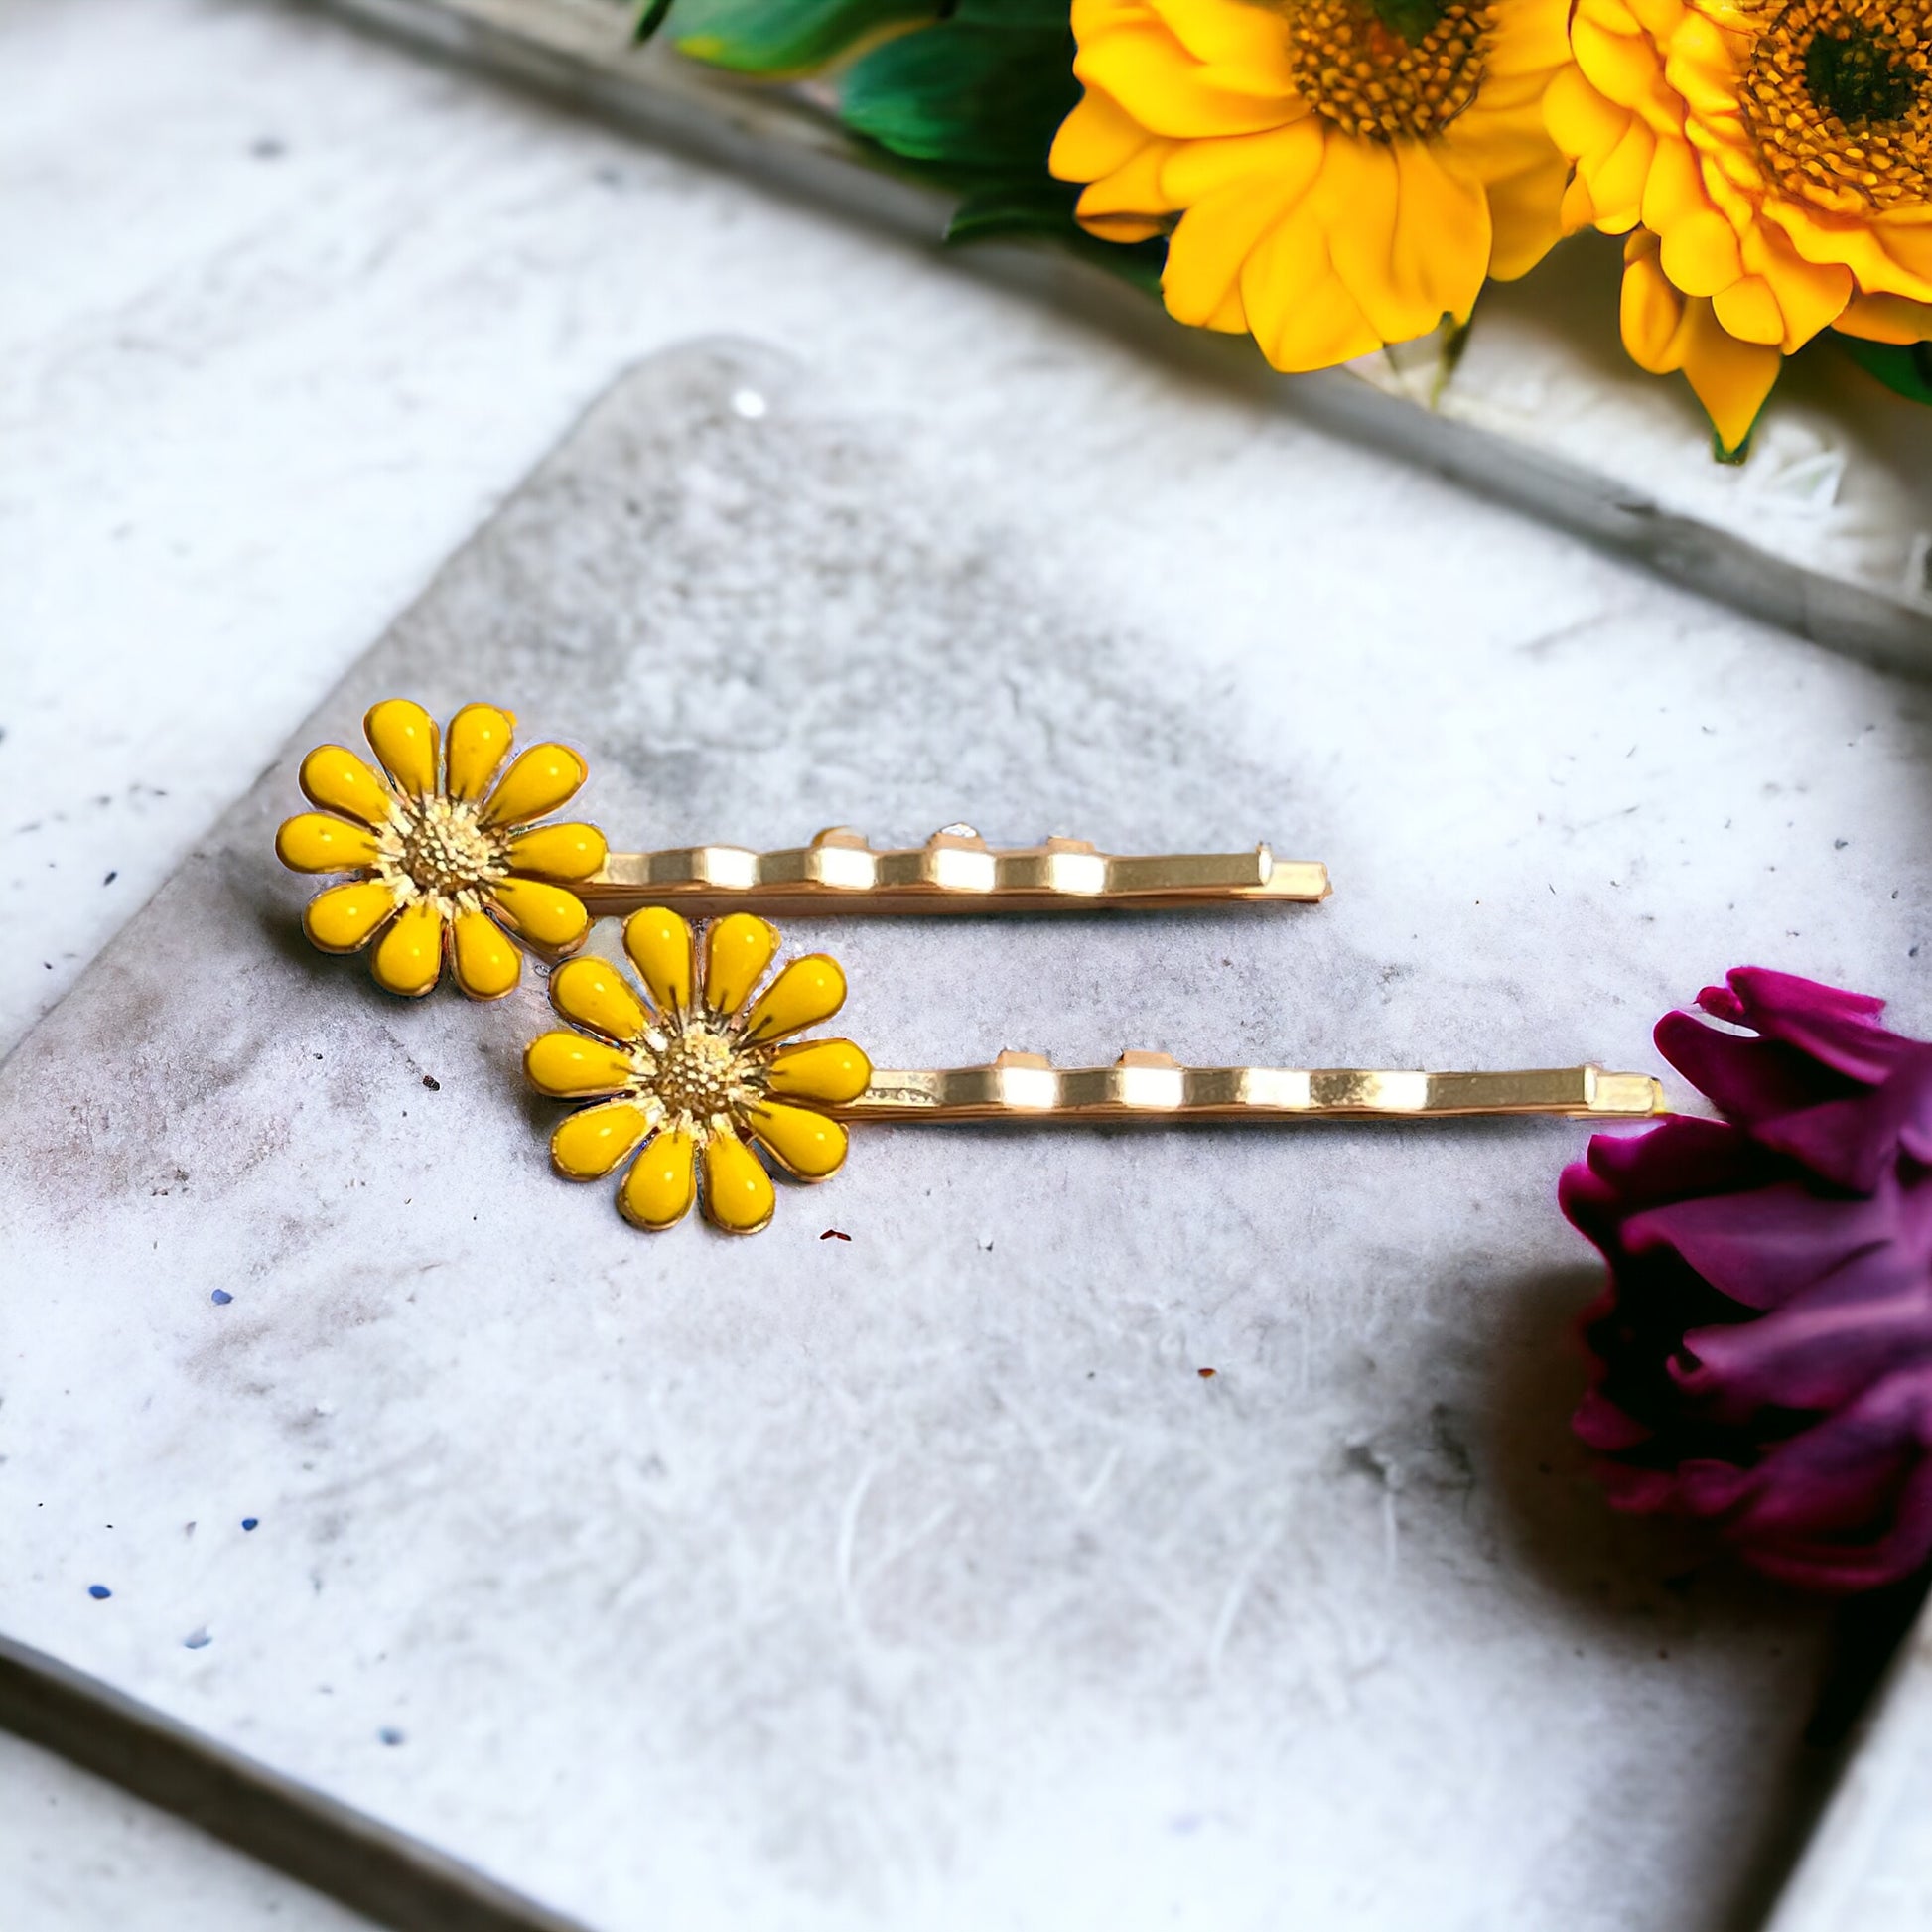 Decorative Yellow Enamel Wildflower Hair Pins - Delicate Floral Accessories